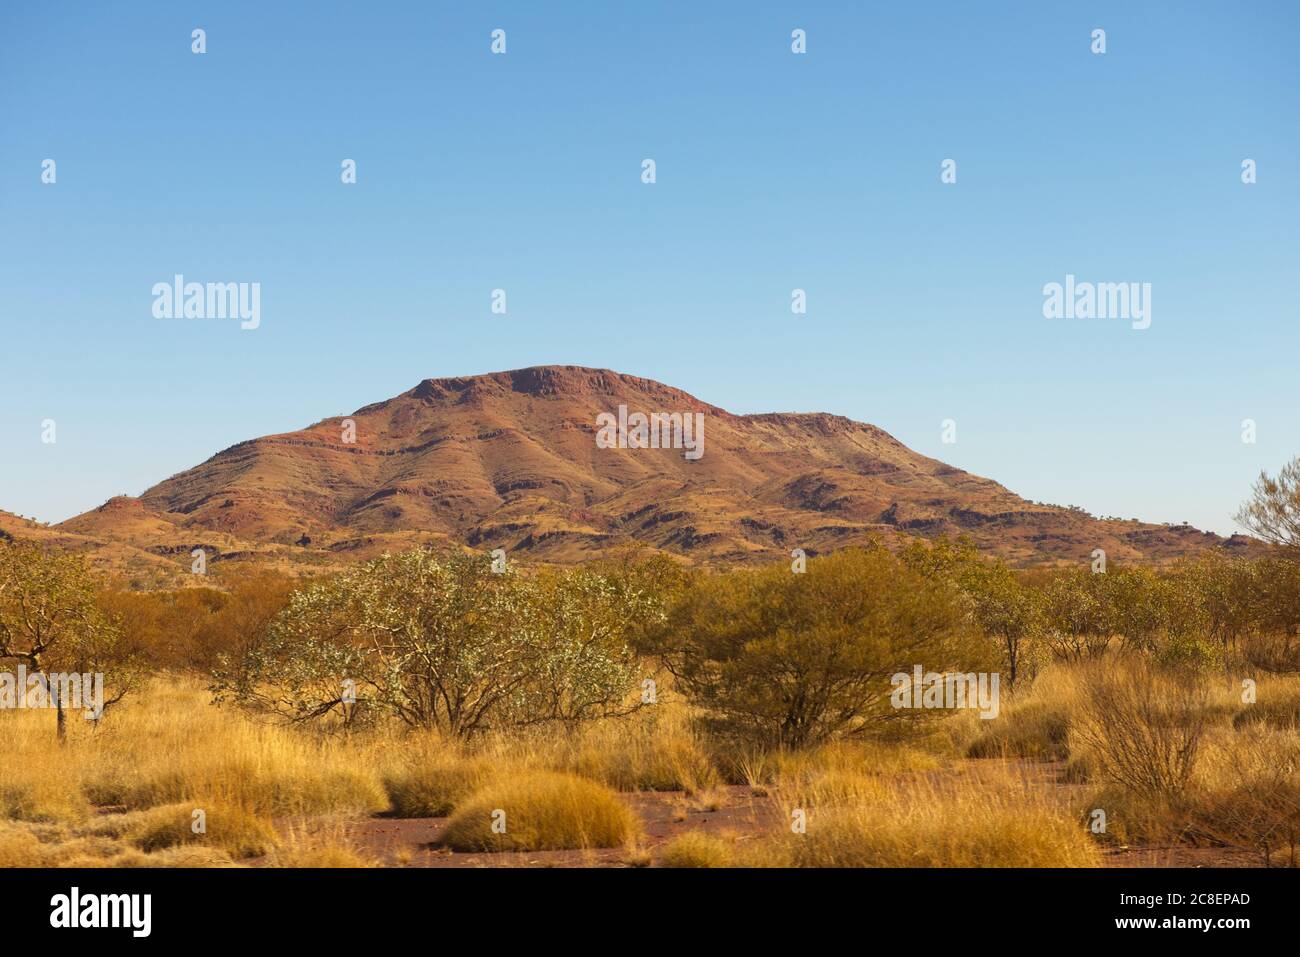 Panoramic view of mountain and bush vegetation of Pilbara outback landscape in Western Australia, with sunny blue sky as background. Stock Photo